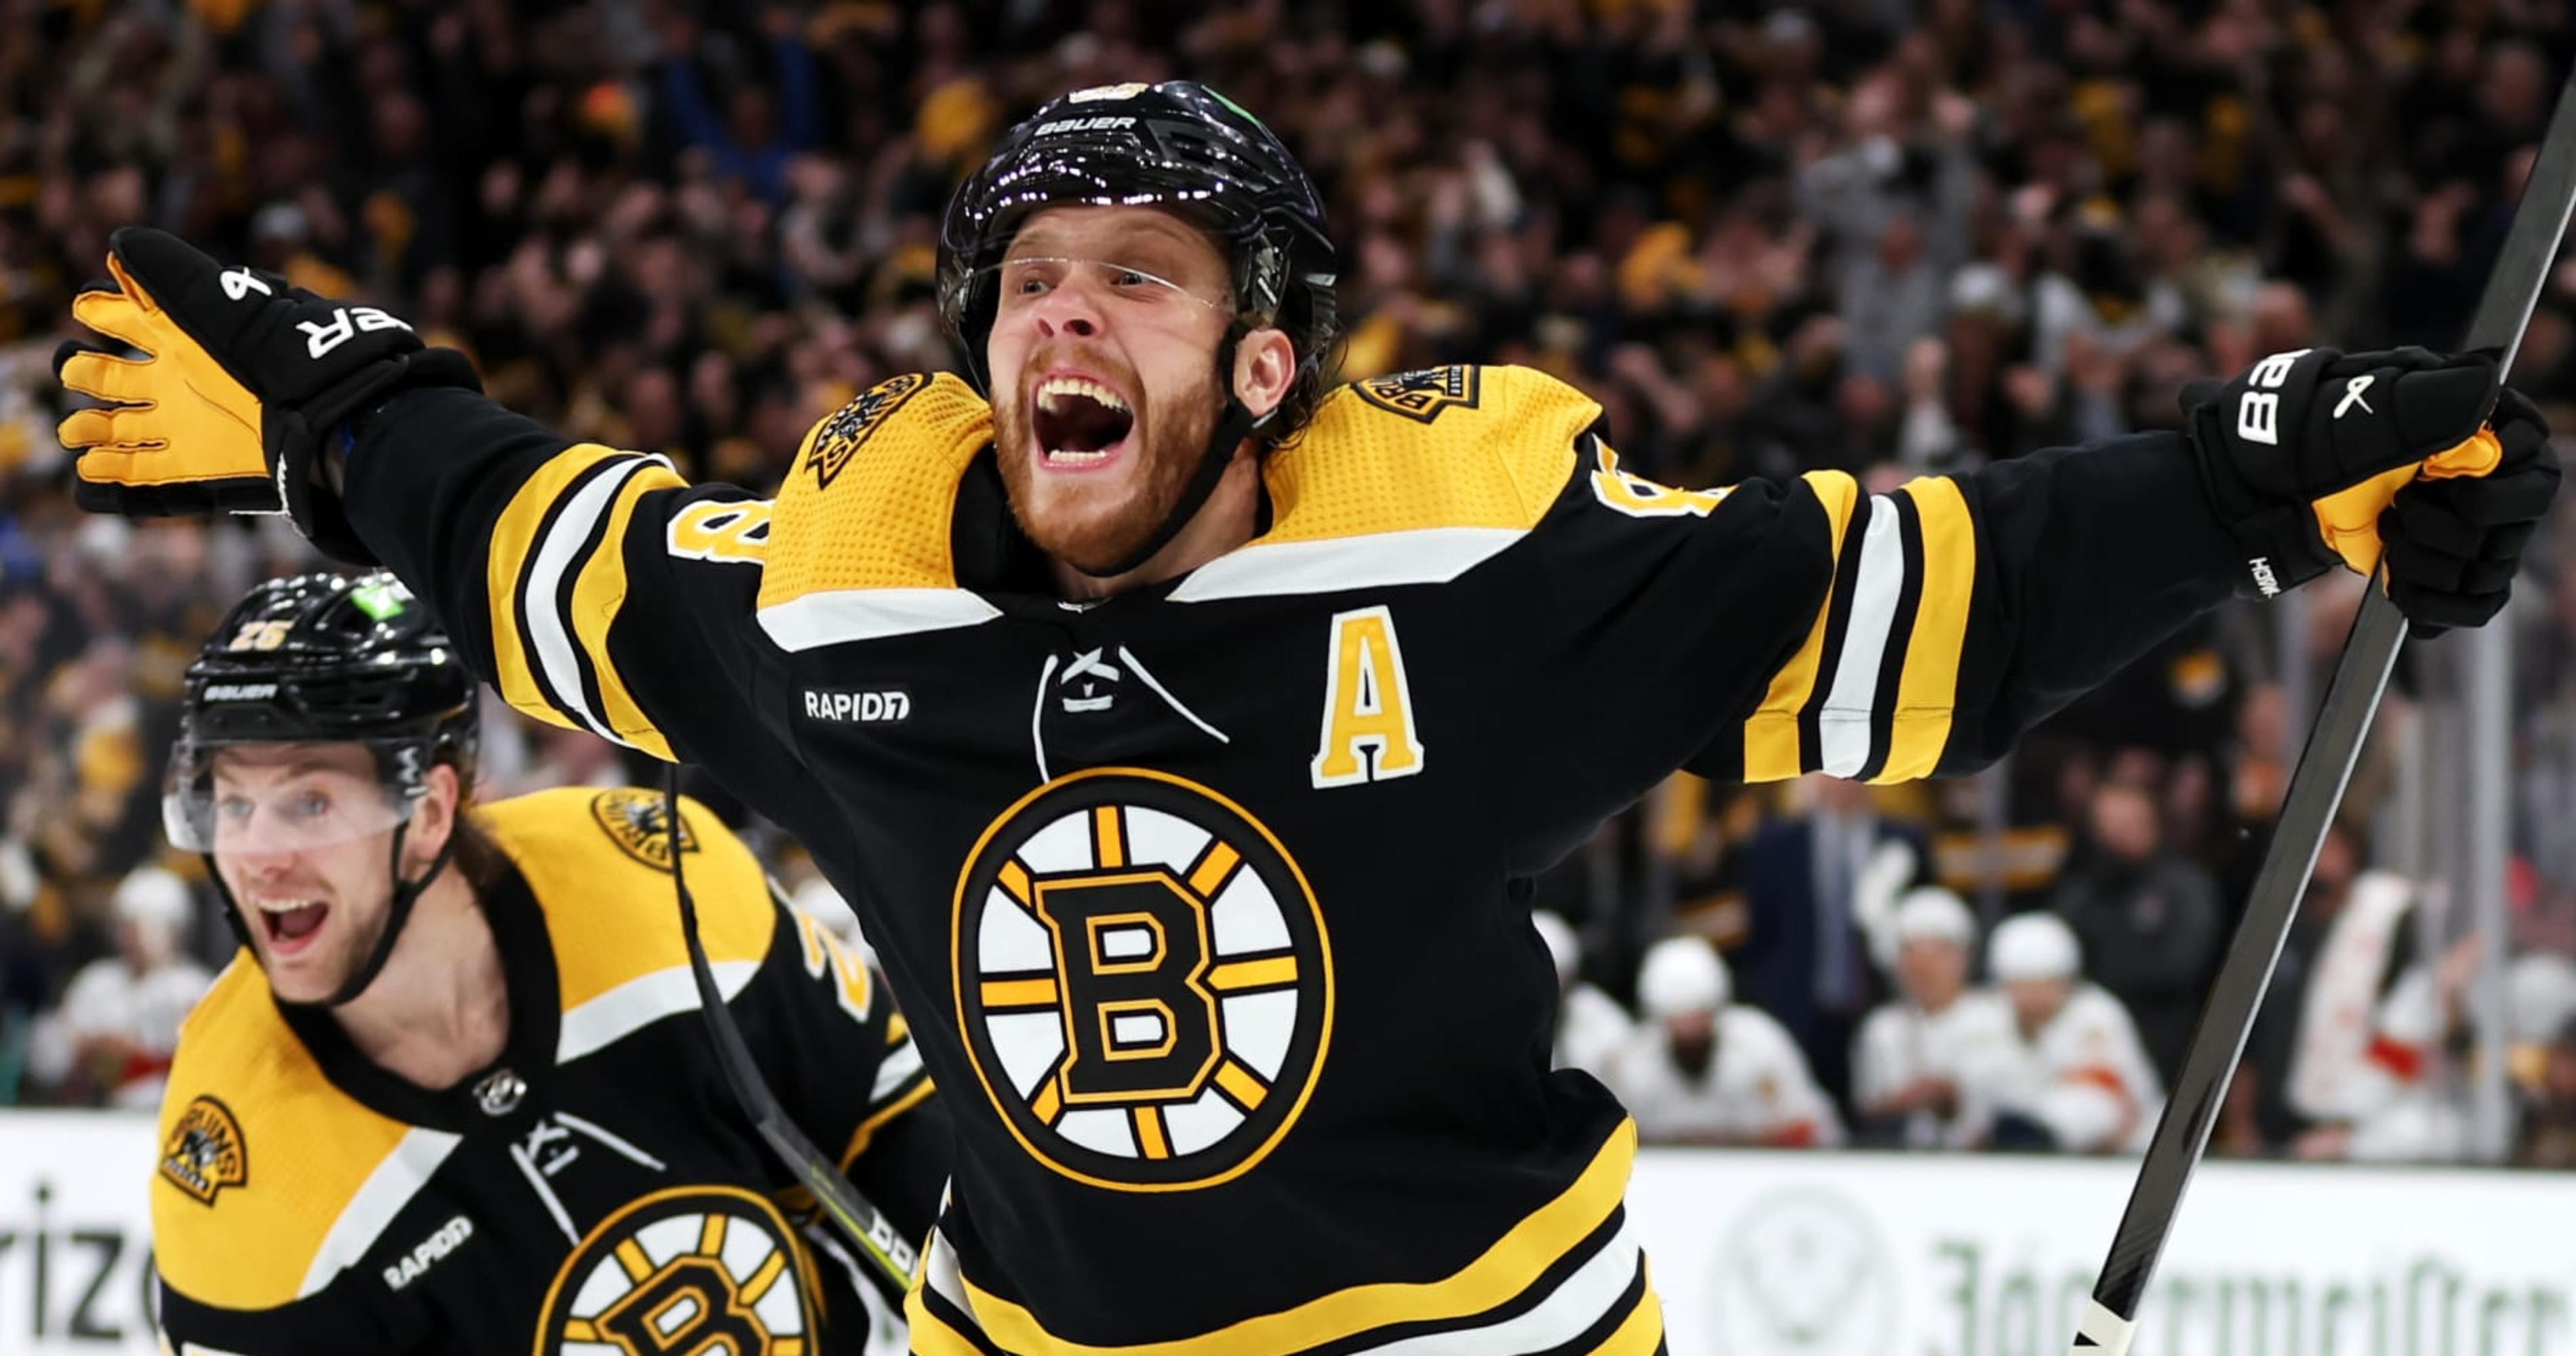 NHL Stanley Cup Odds: Bruins favored; Hurricanes, Avalanche next in line